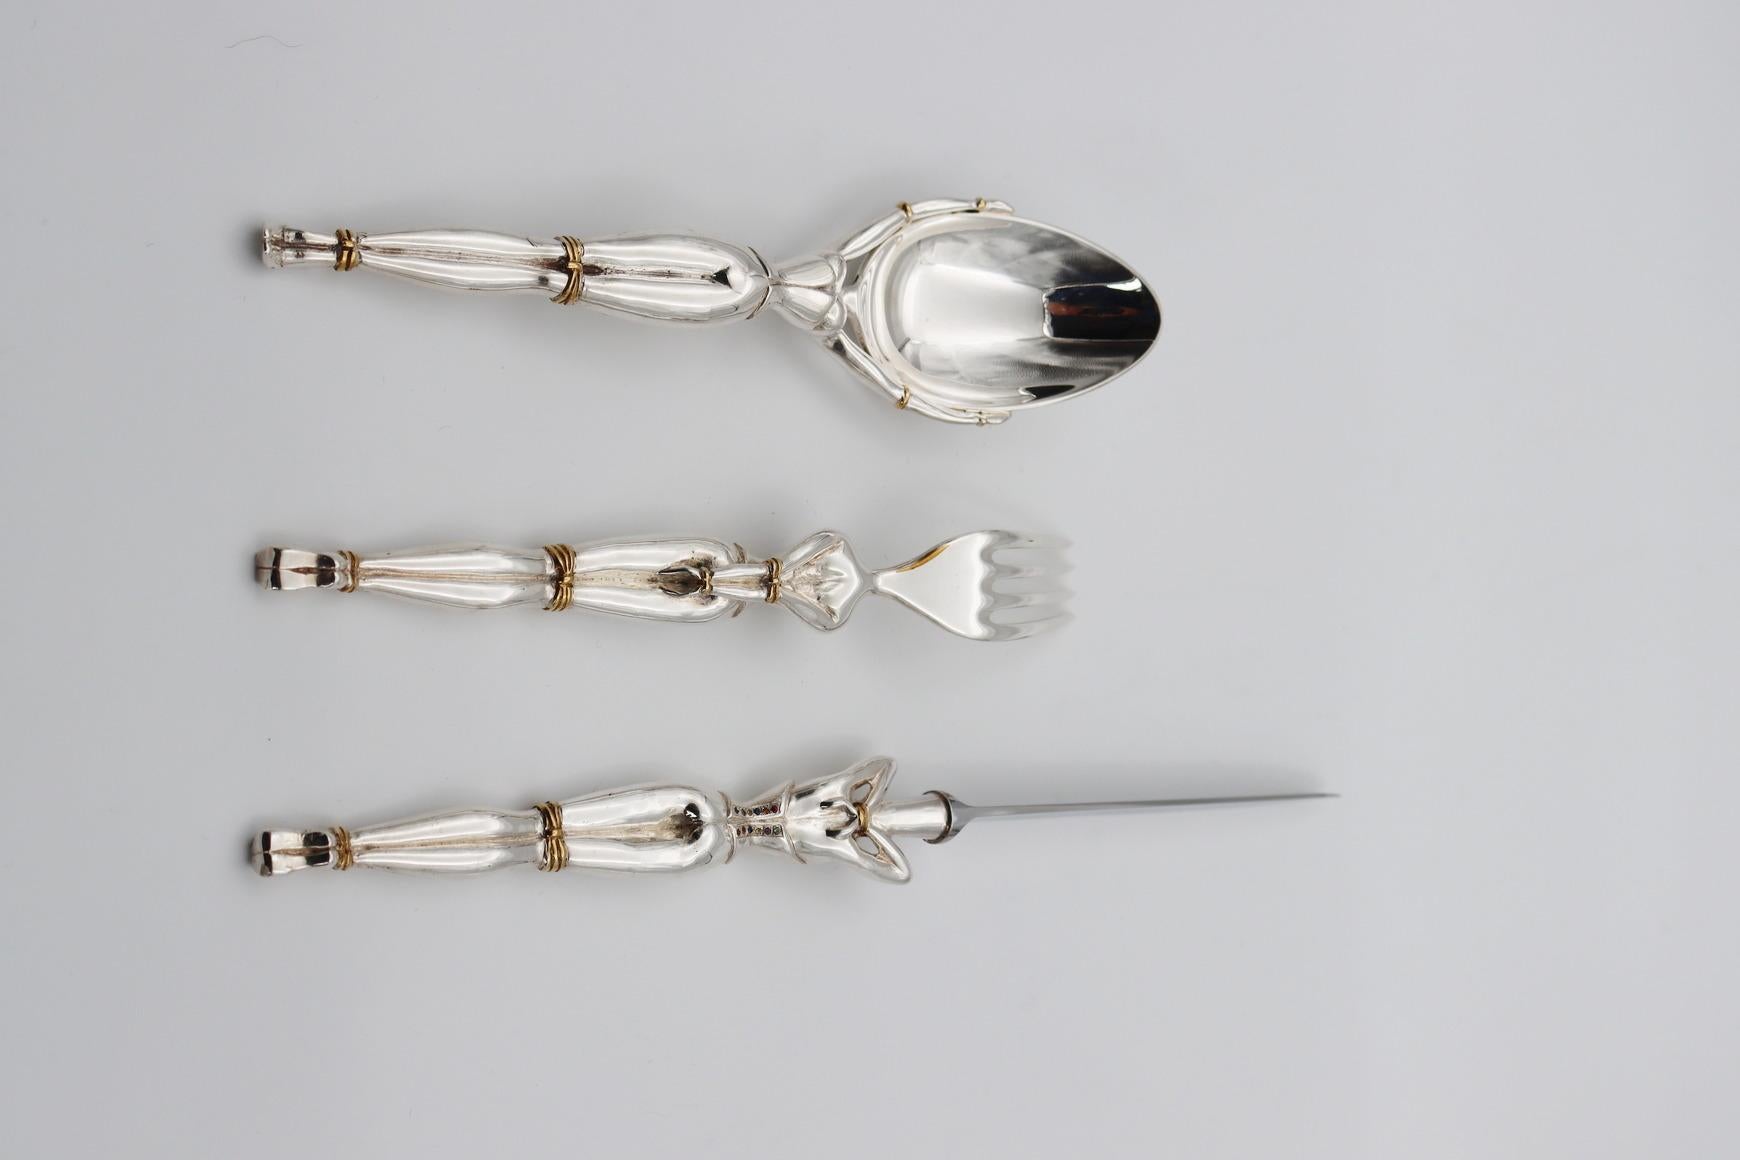 GWEN Set of 3 pieces in Silver Bronze or Gold Bronze by Richard Lauret

Set of 3 pieces (Table spoon, table/fish forks, table knife or meat/fish knife) in silver bronze 35/42 microns 

It is possible to order all products separately

Table